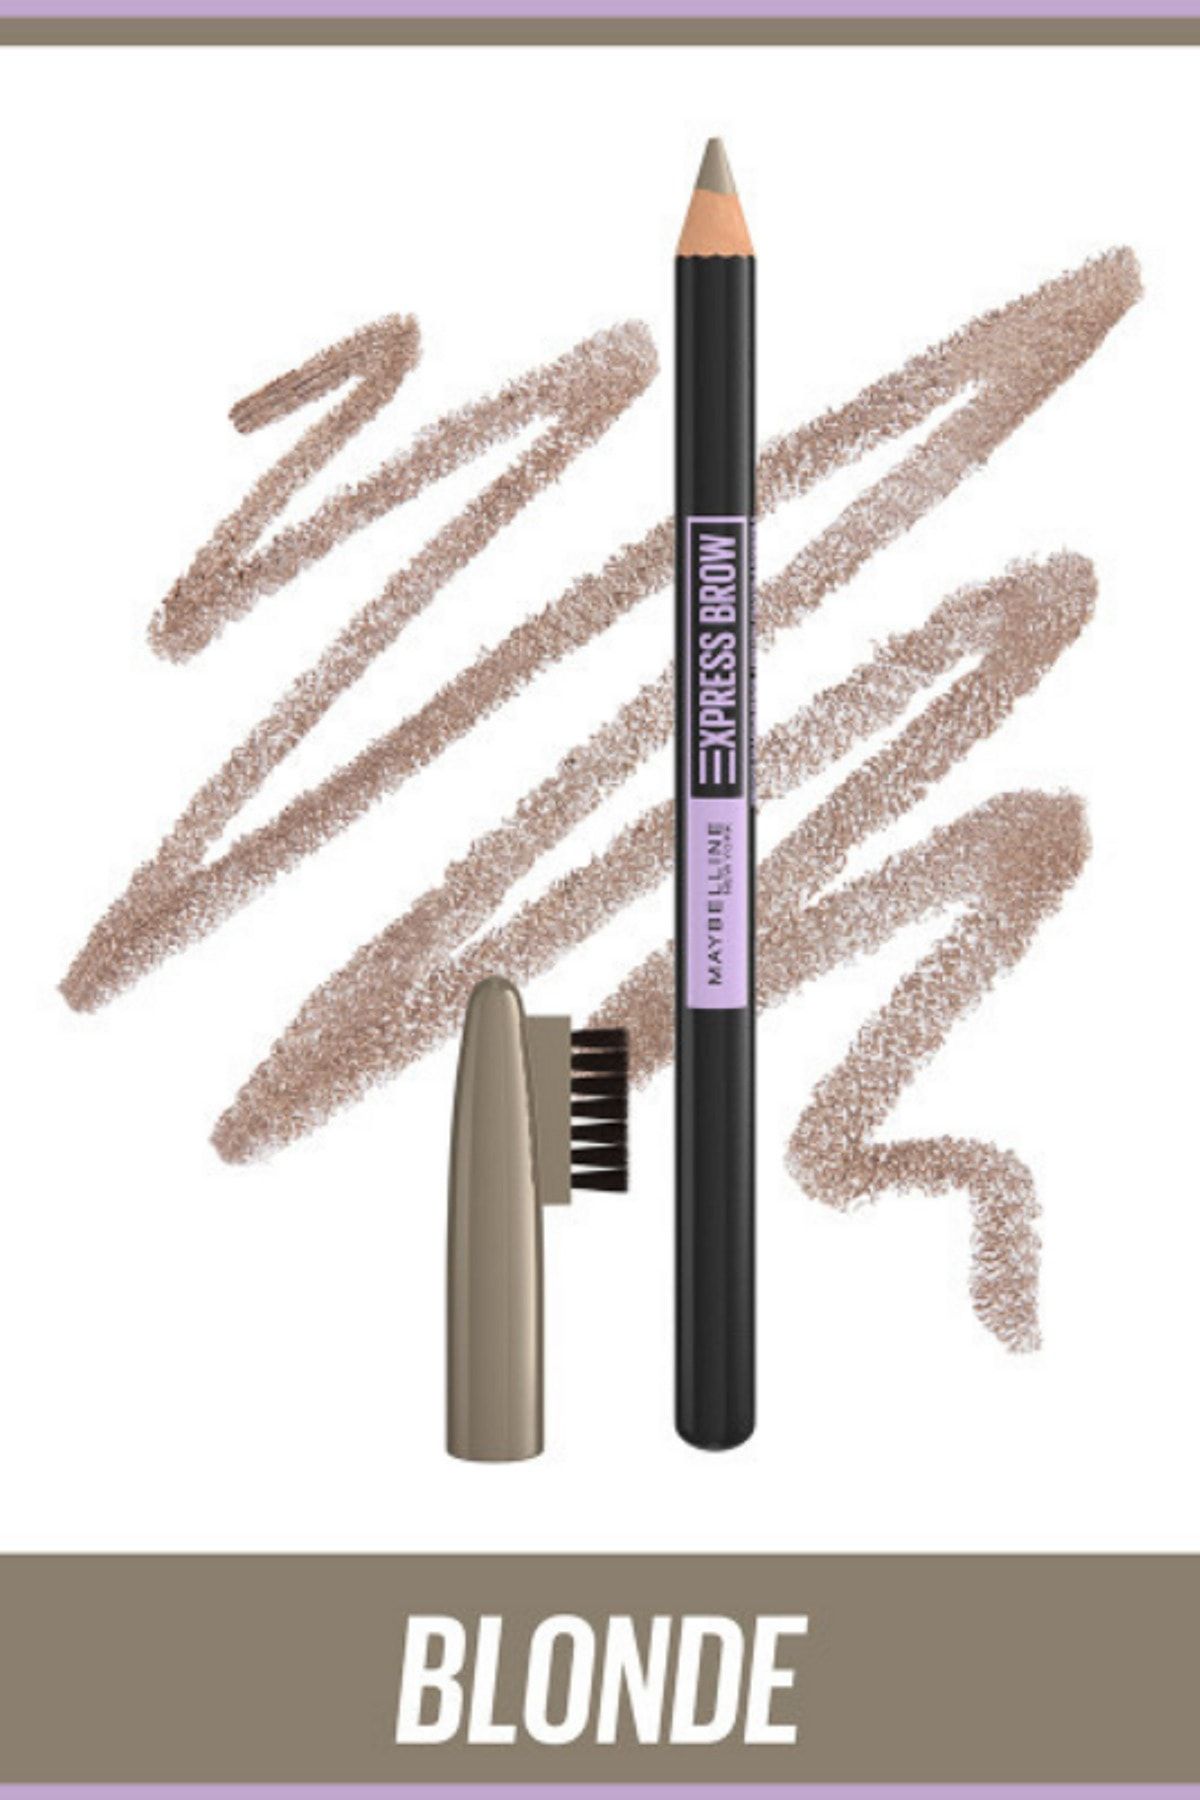 Maybelline New York Express Brow Shaping Pencil - Blonde